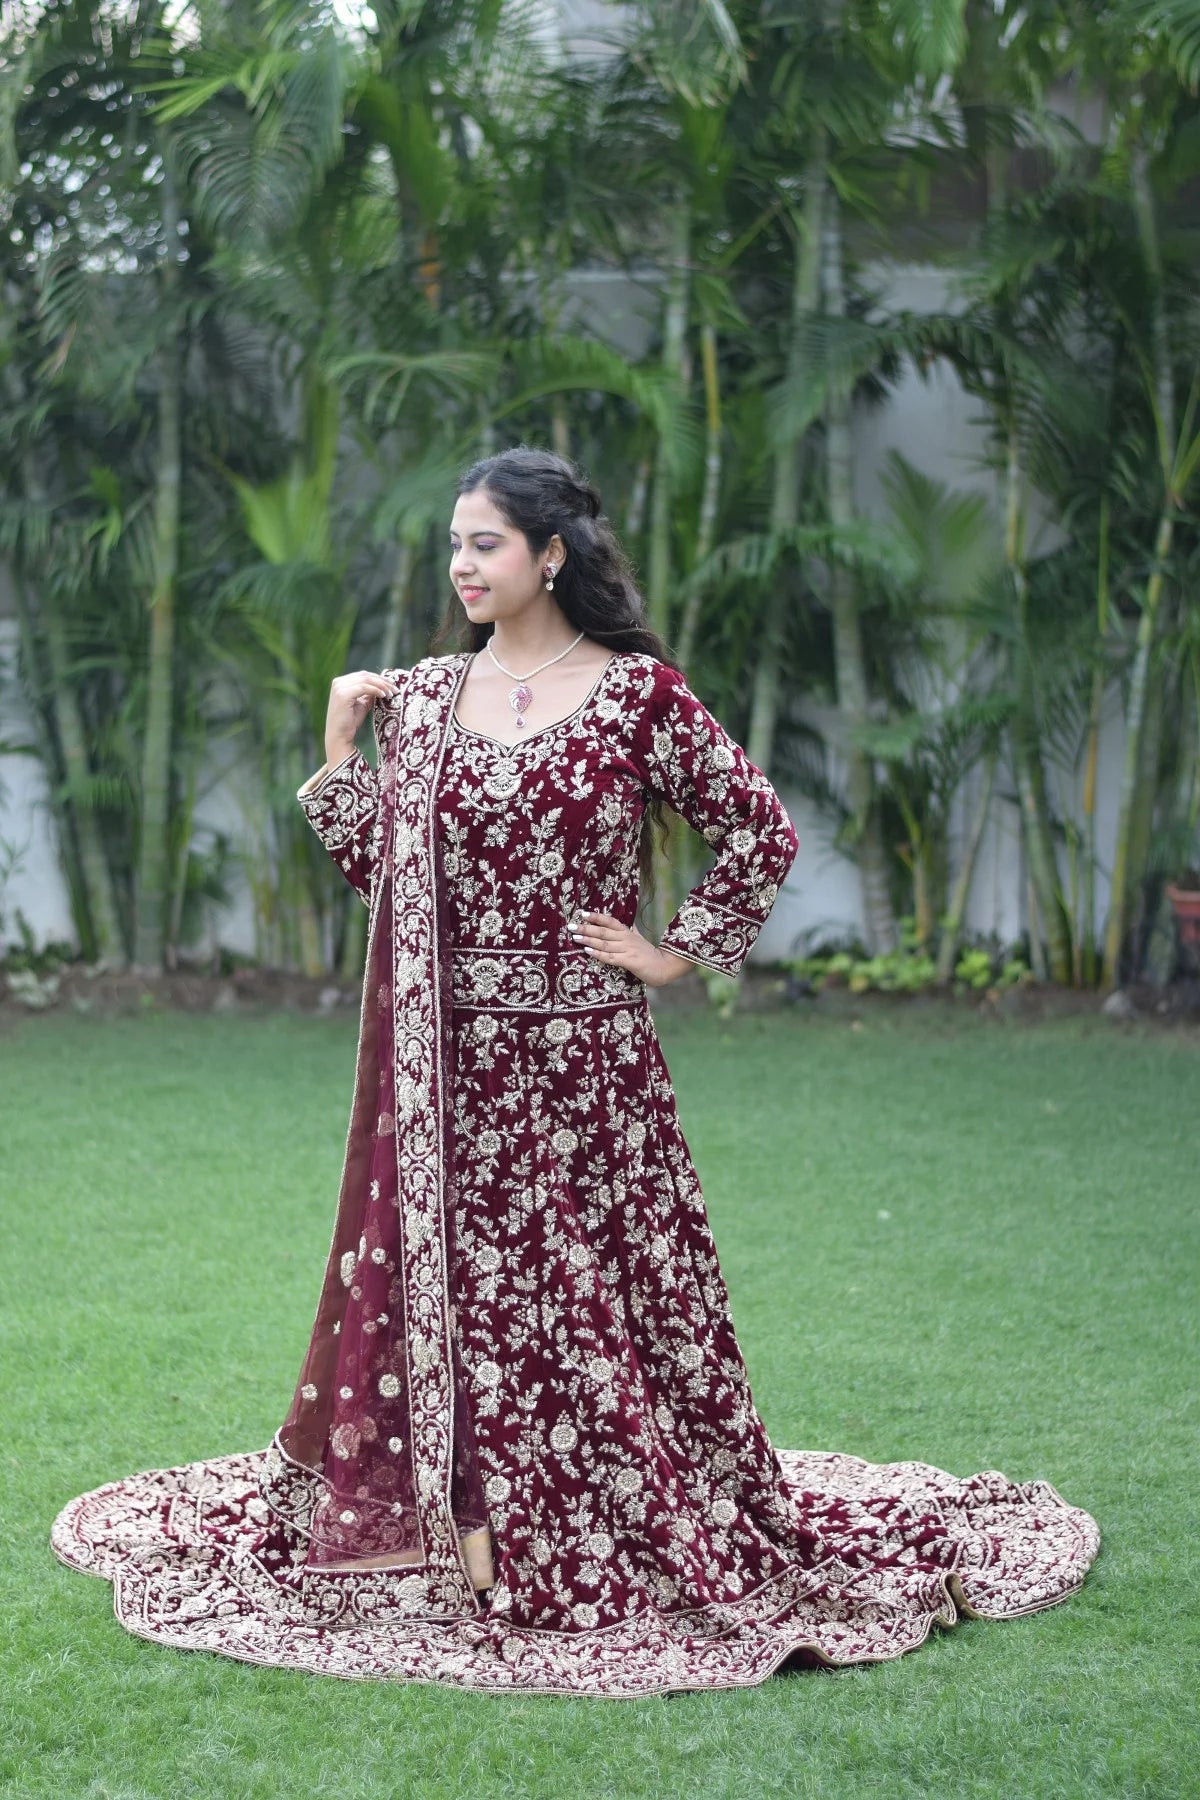 This Indian woman's confidence shines through in her maroon Trail Gown, a perfect blend of traditional Indian fashion and modern sensibility.